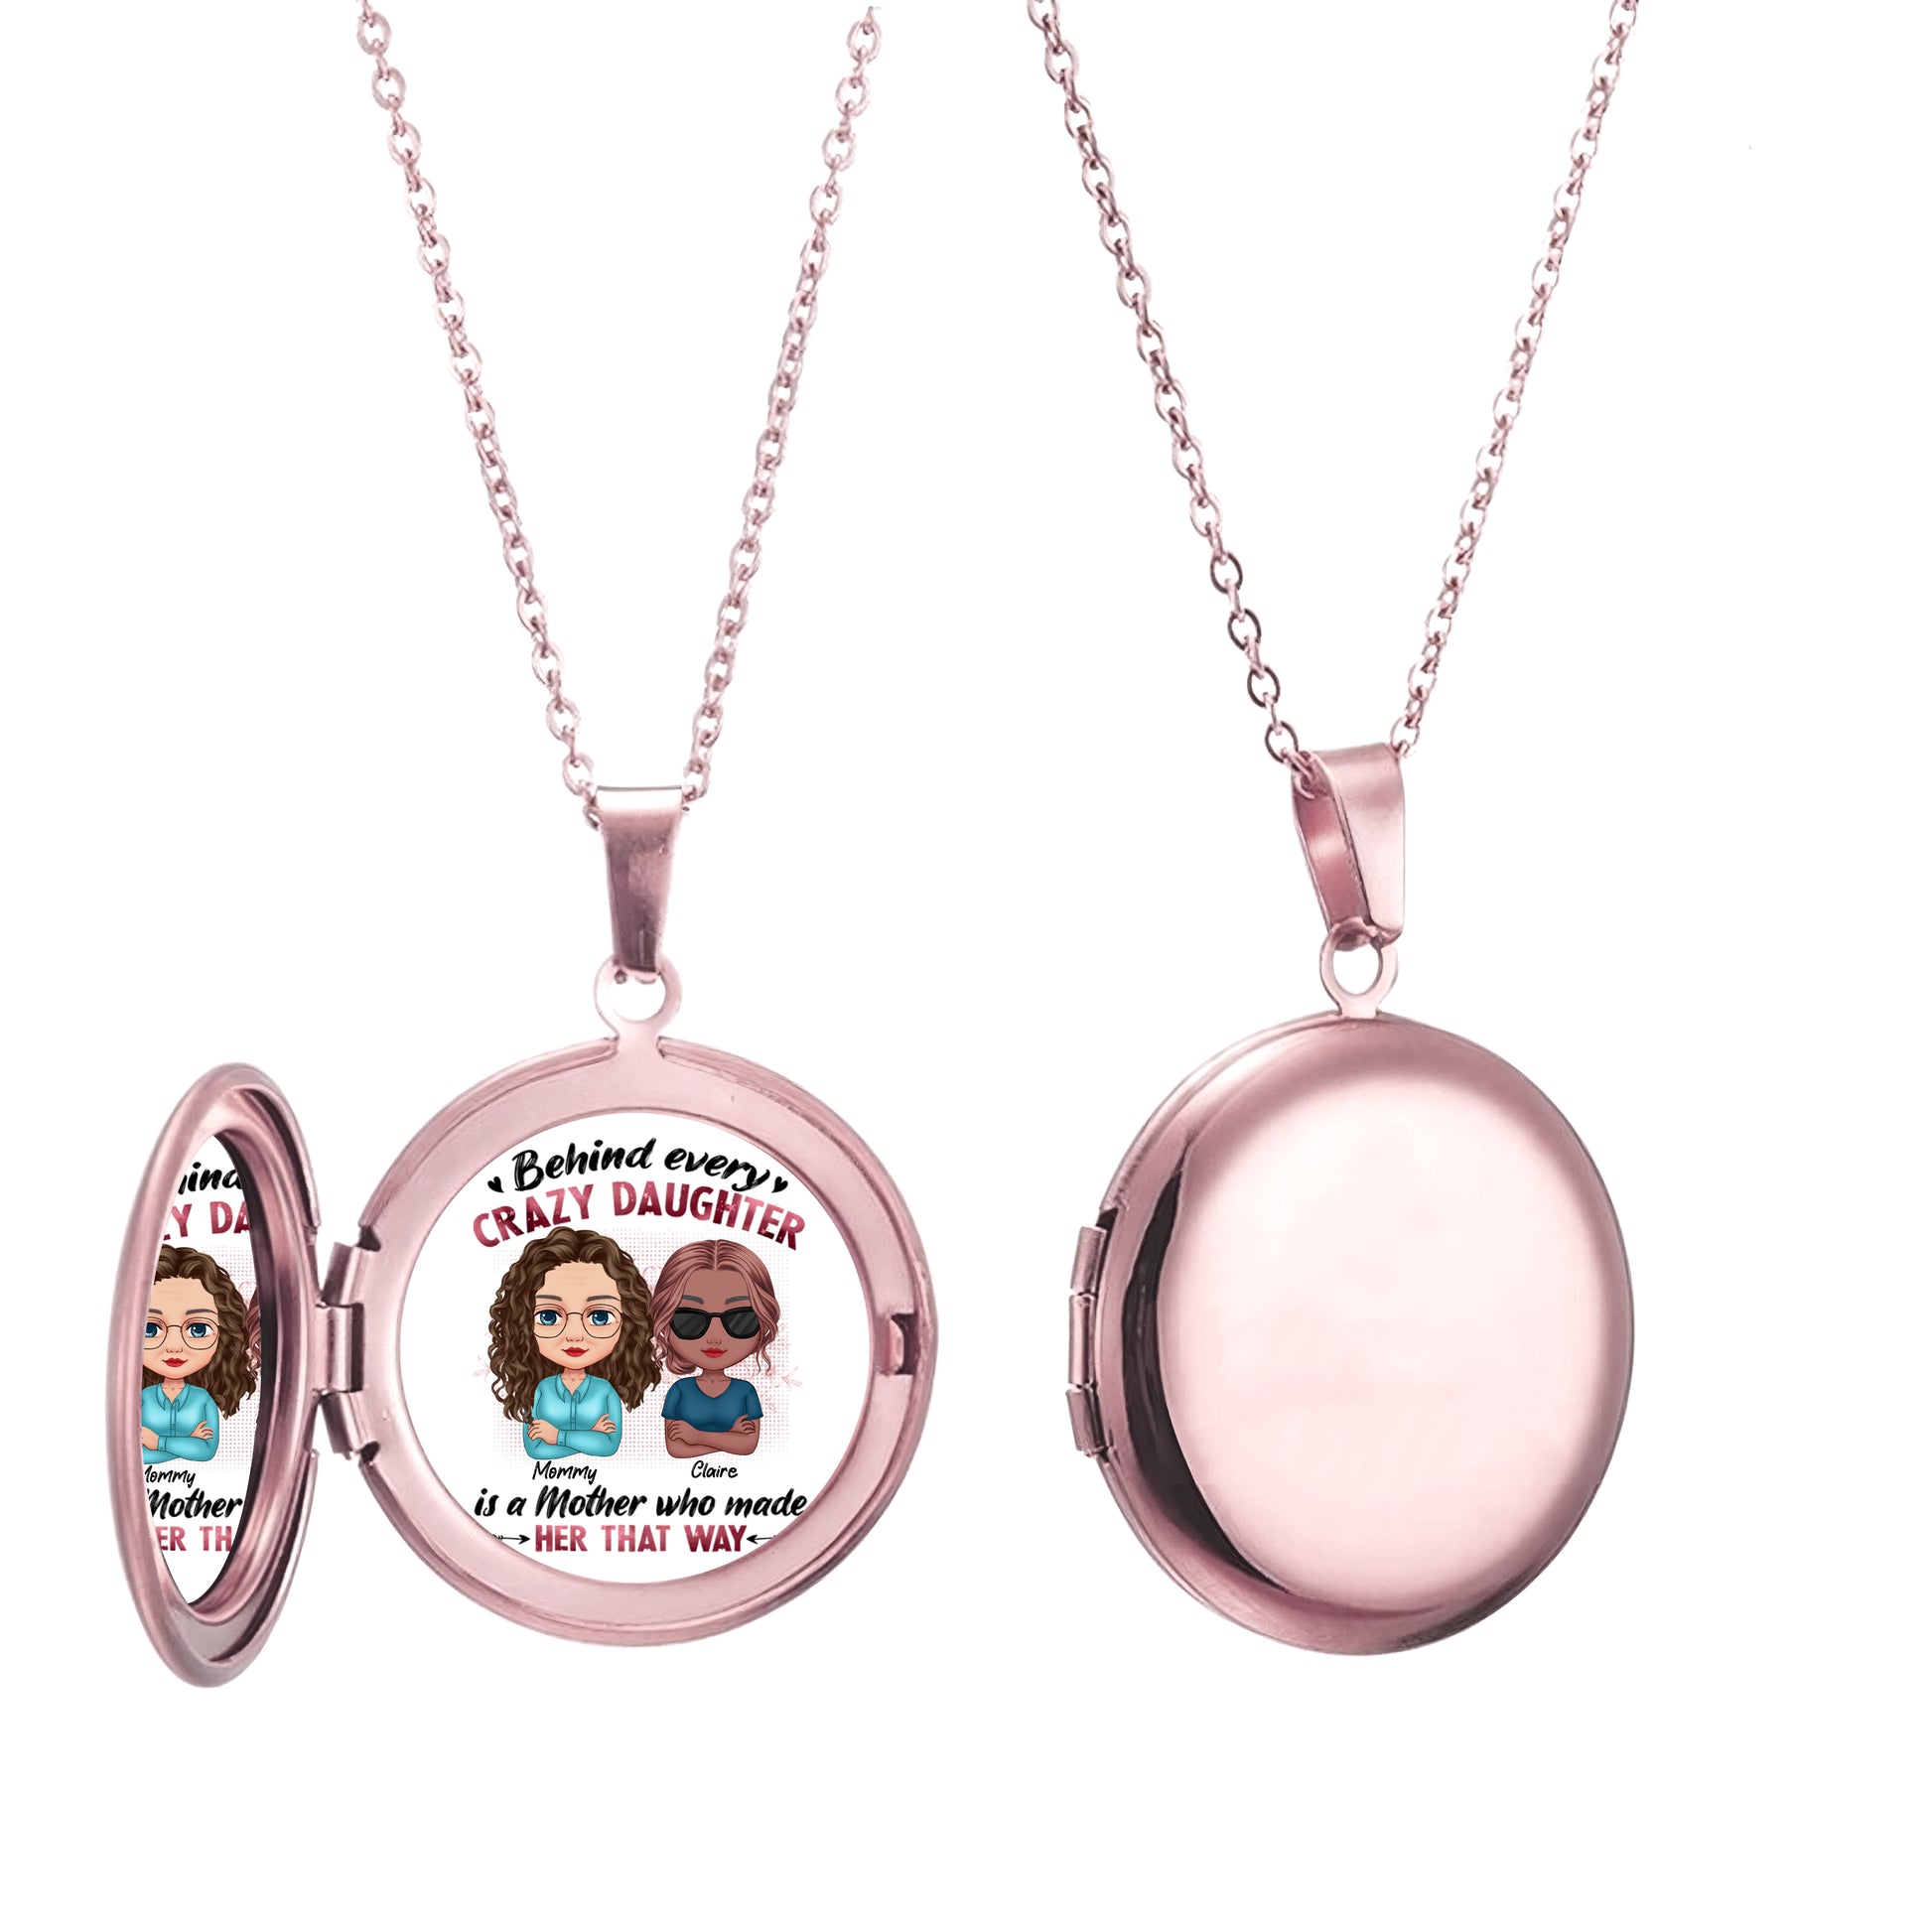 Behind Every Crazy Daughter Is A Mother - Personalized Locket Necklace - Gifts For Mother's Day